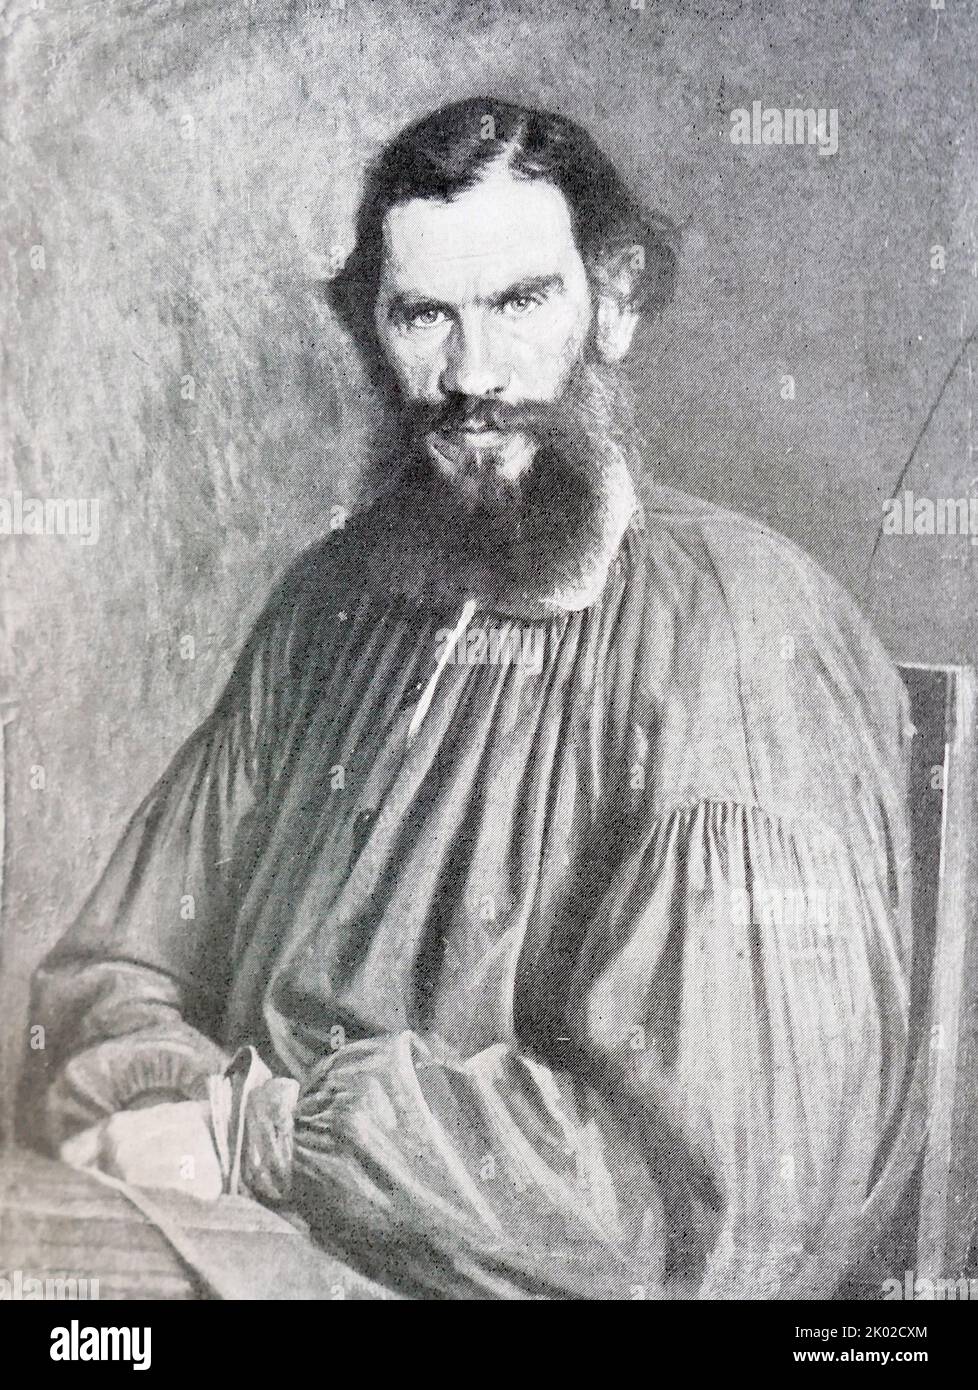 Portrait of Leo Tolstoy by Ivan Kramskoy (1873). Count Lev Nikolayevich Tolstoy (1828 - 1910), referred to in English as Leo Tolstoy, was a Russian writer who is regarded as one of the greatest authors of all time Stock Photo